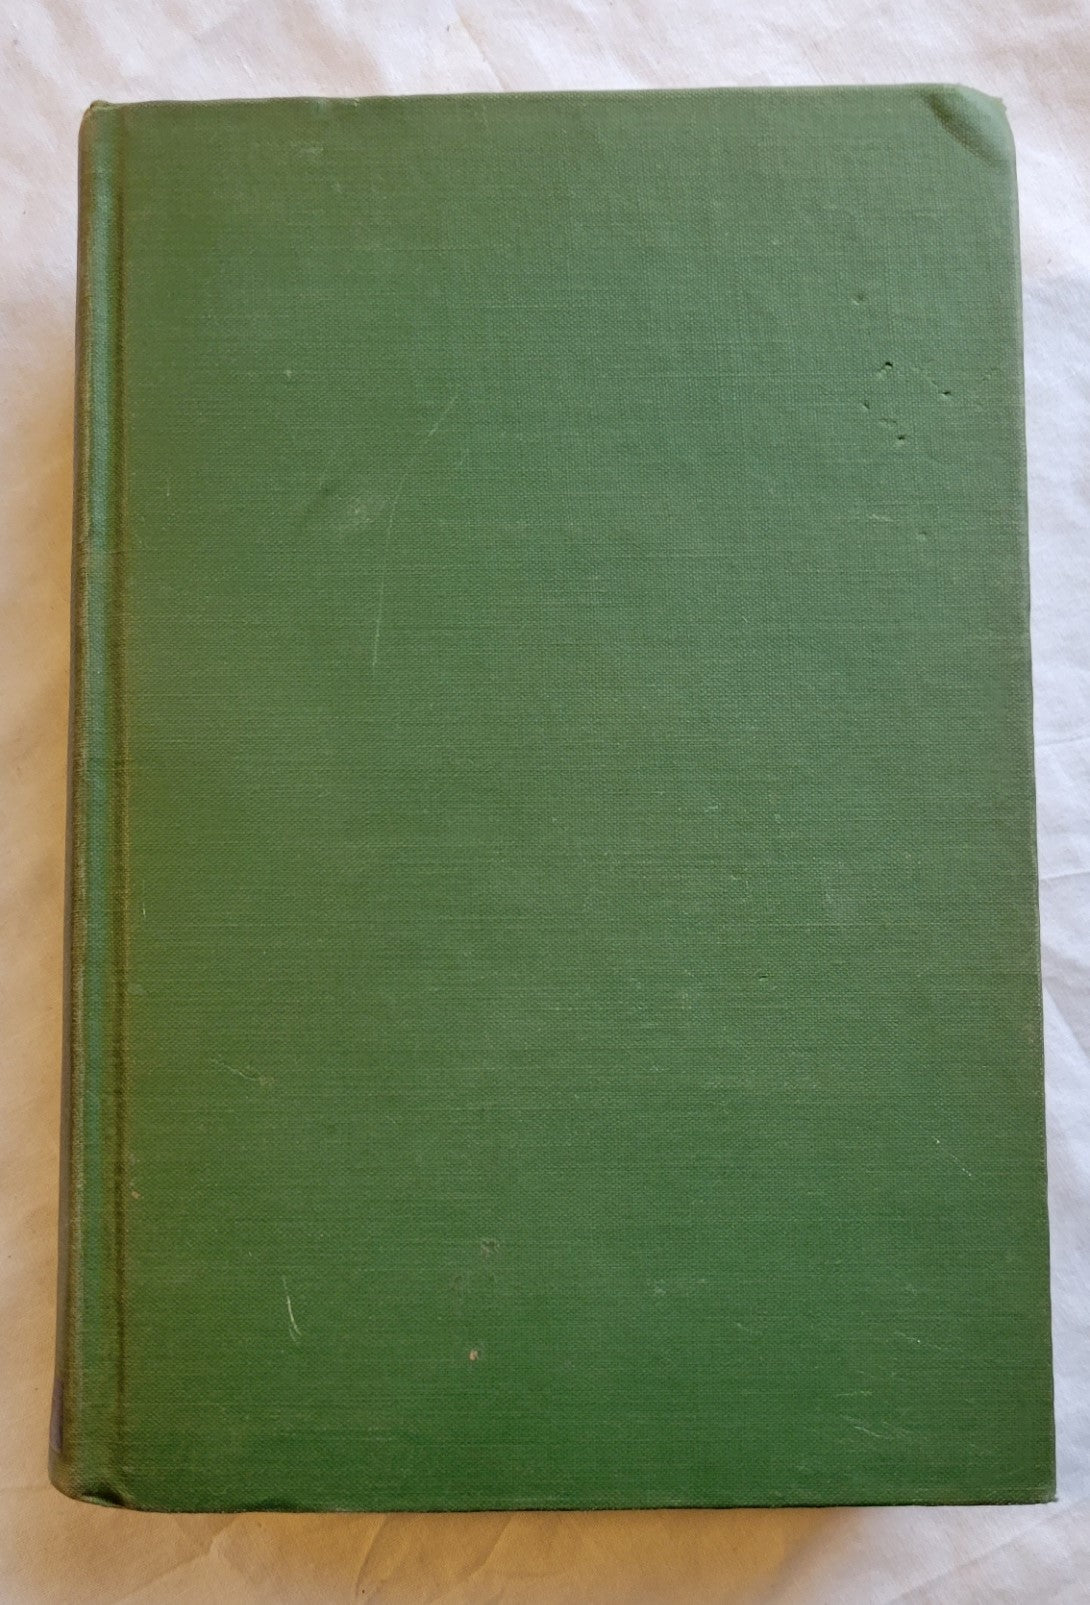 Vintage book. "Collected Stories" by William Faulkner, published by Random House. View of front cover.